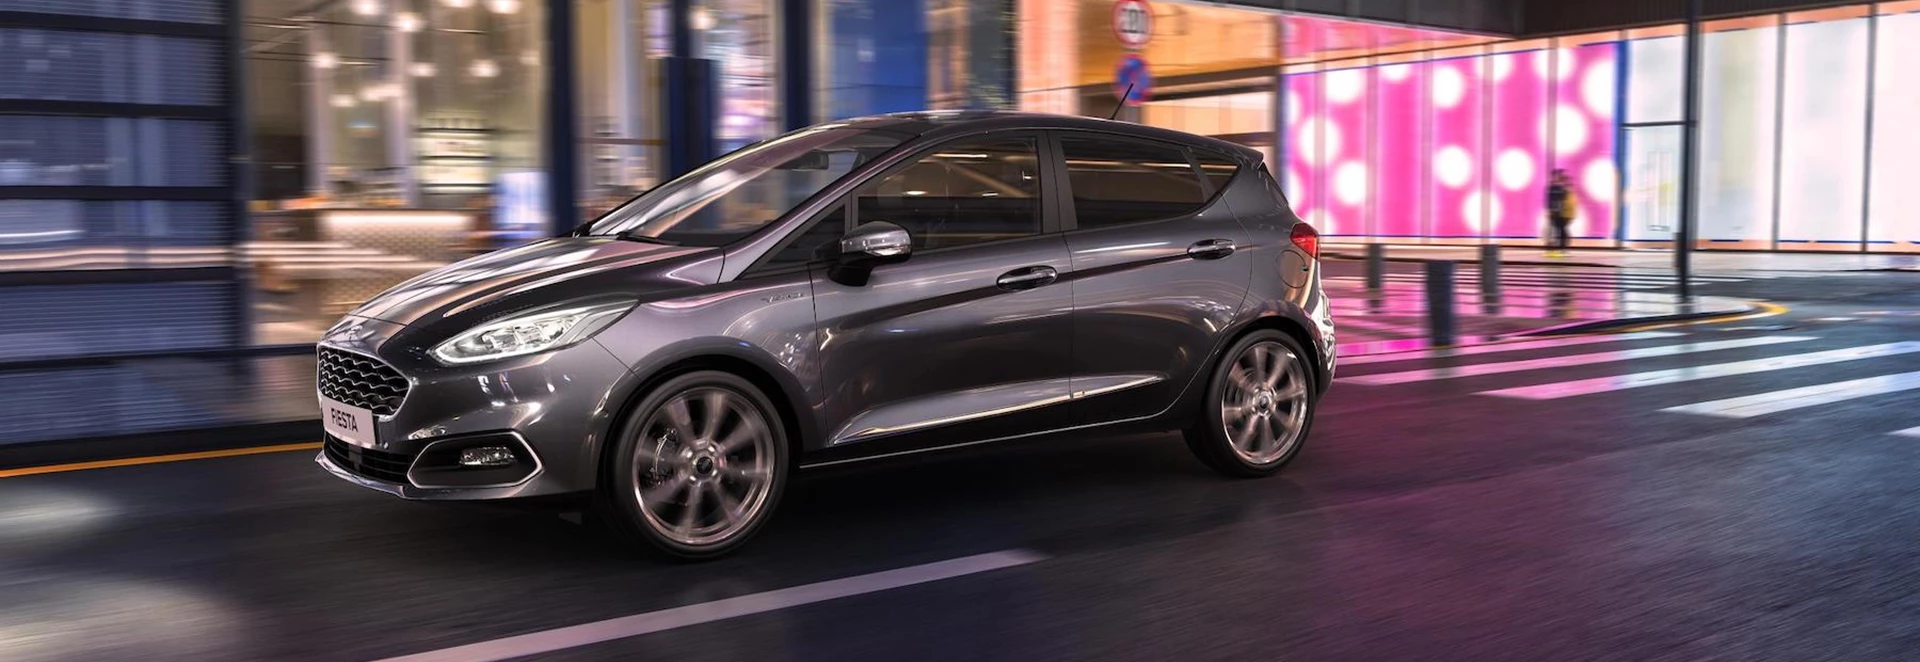 Five tech highlights of the 2021 Ford Fiesta 